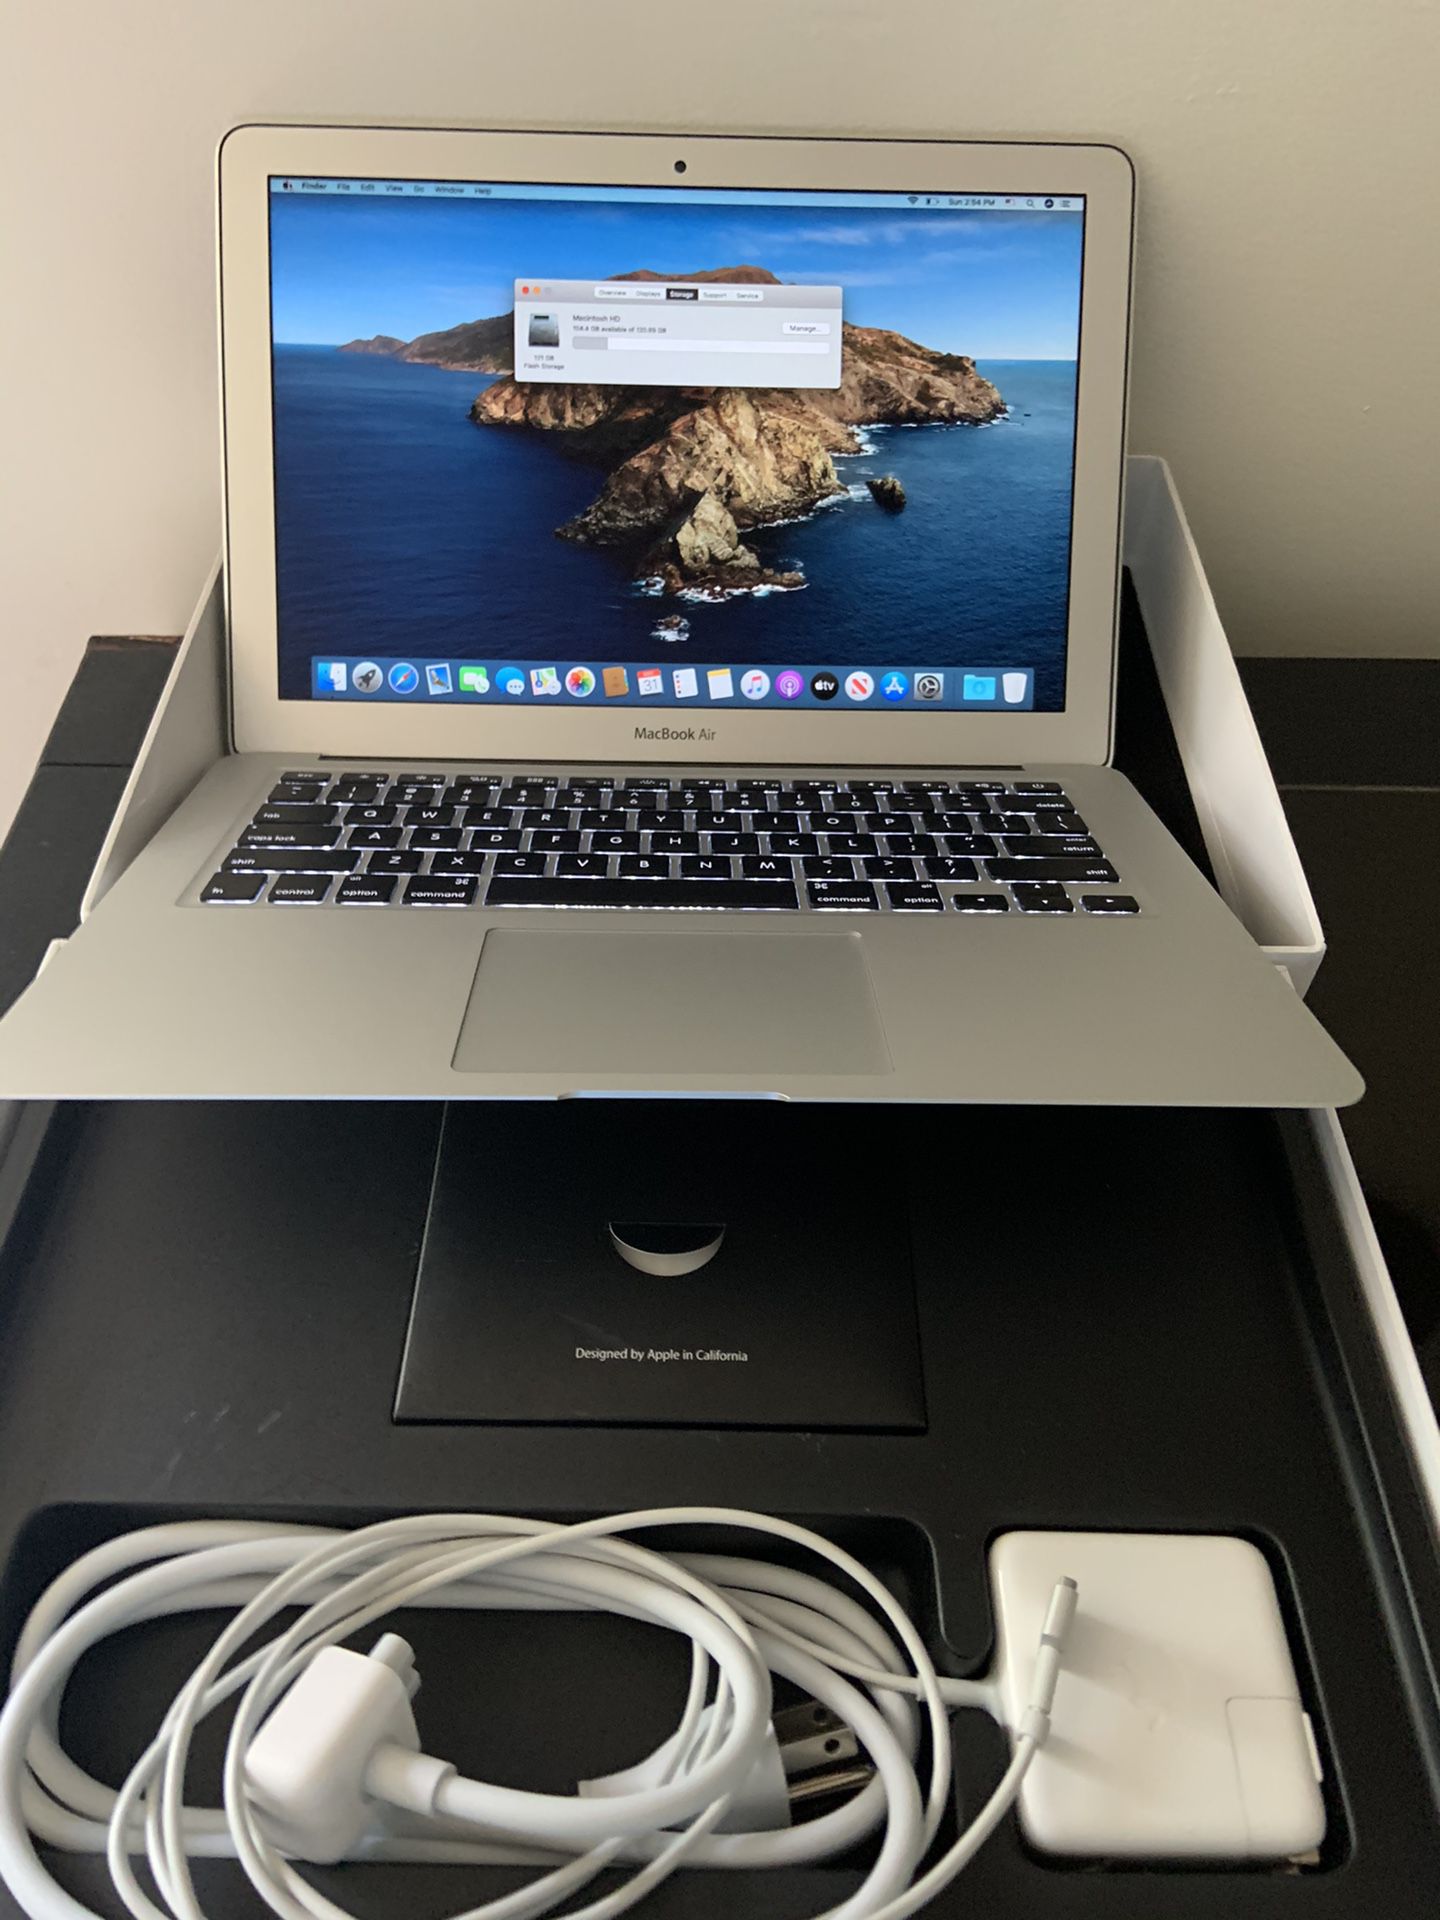 Almost new 2015 MacBook Air in perfect condition